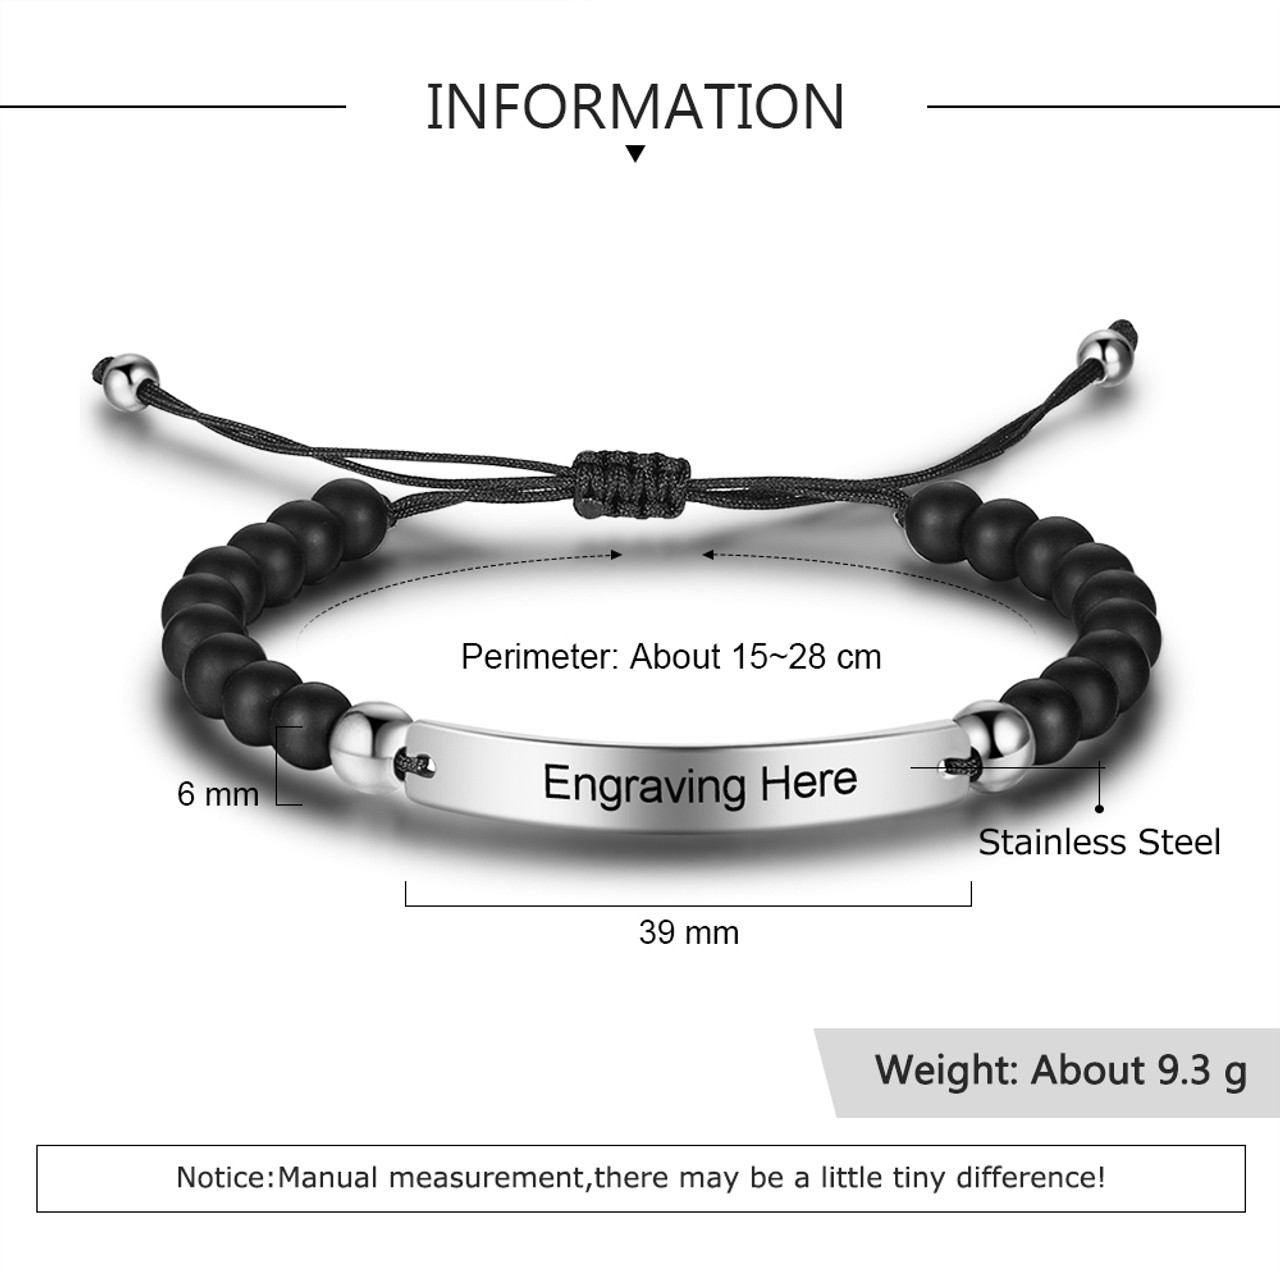 Personalized Quality Stainless Steel Beaded ID Bracelet - ForeverGifts.com